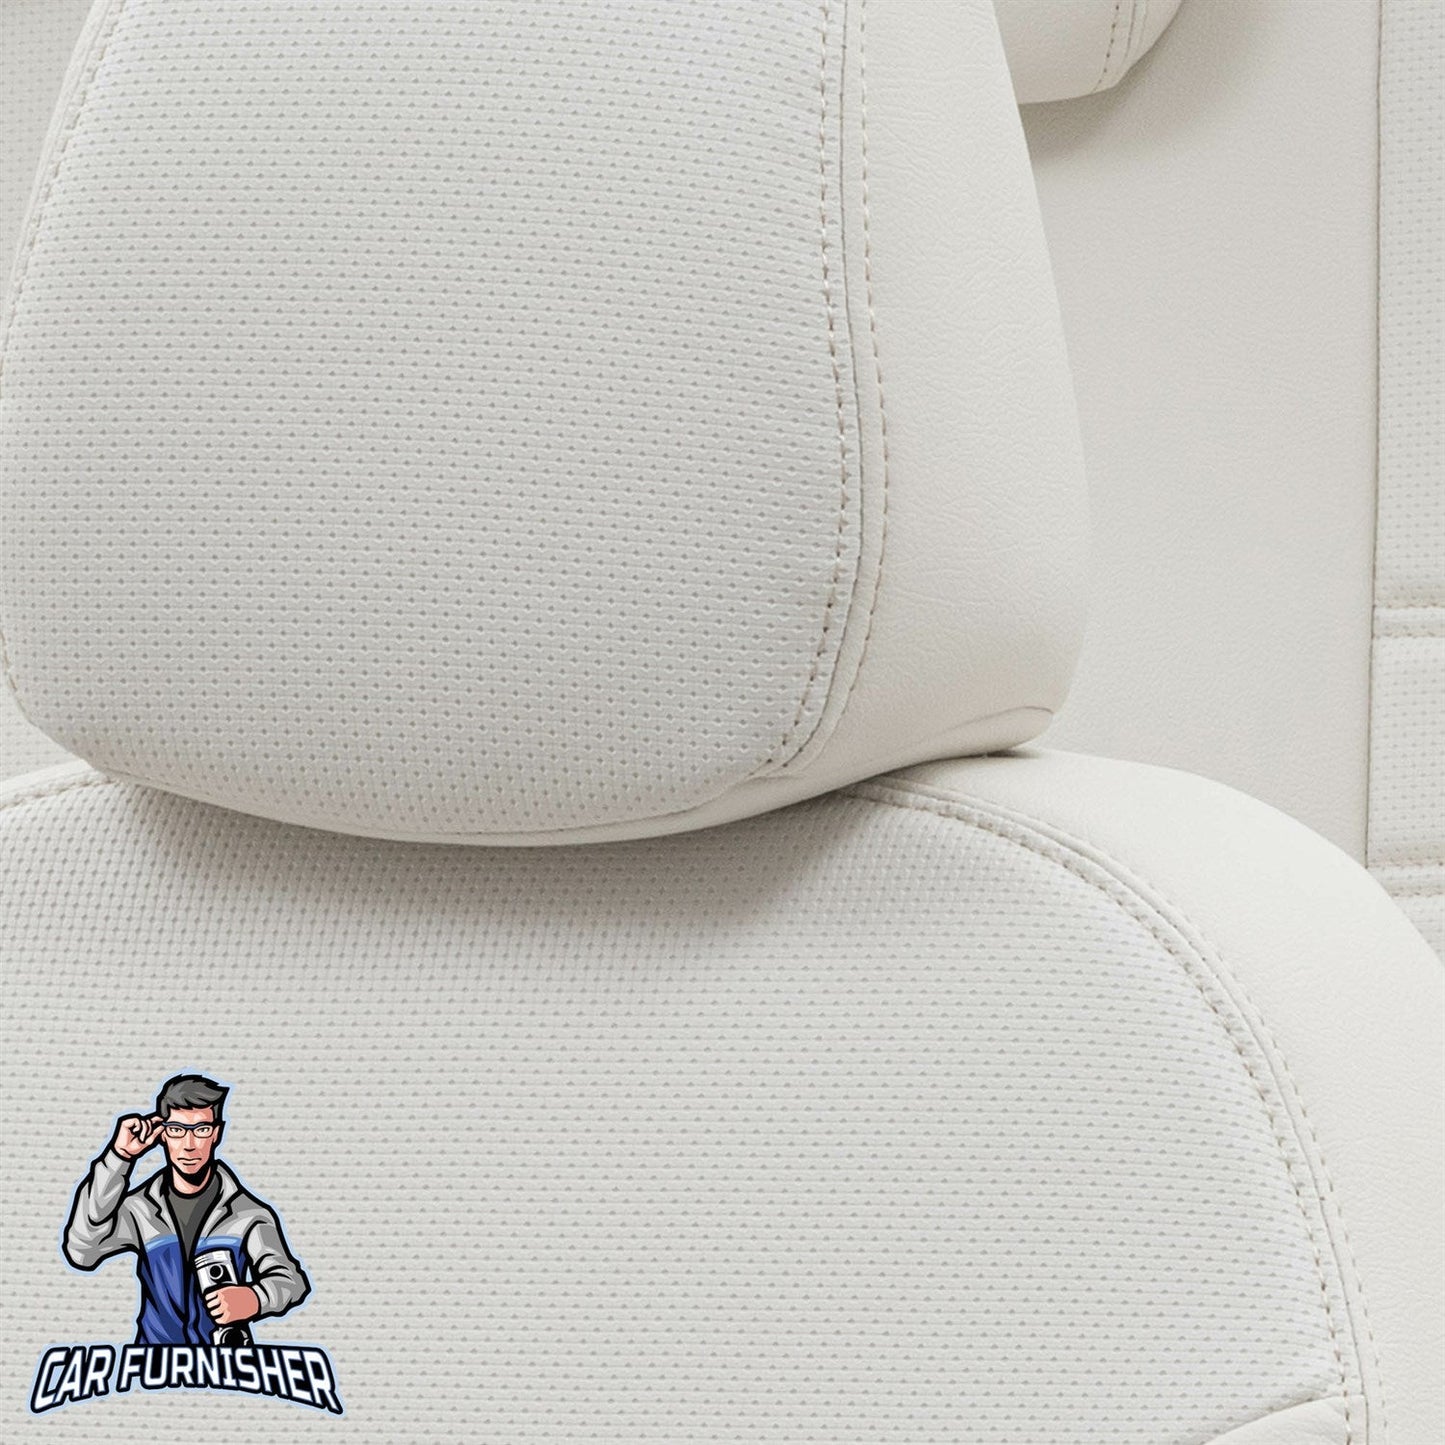 Mitsubishi Lancer Seat Covers New York Leather Design Ivory Leather